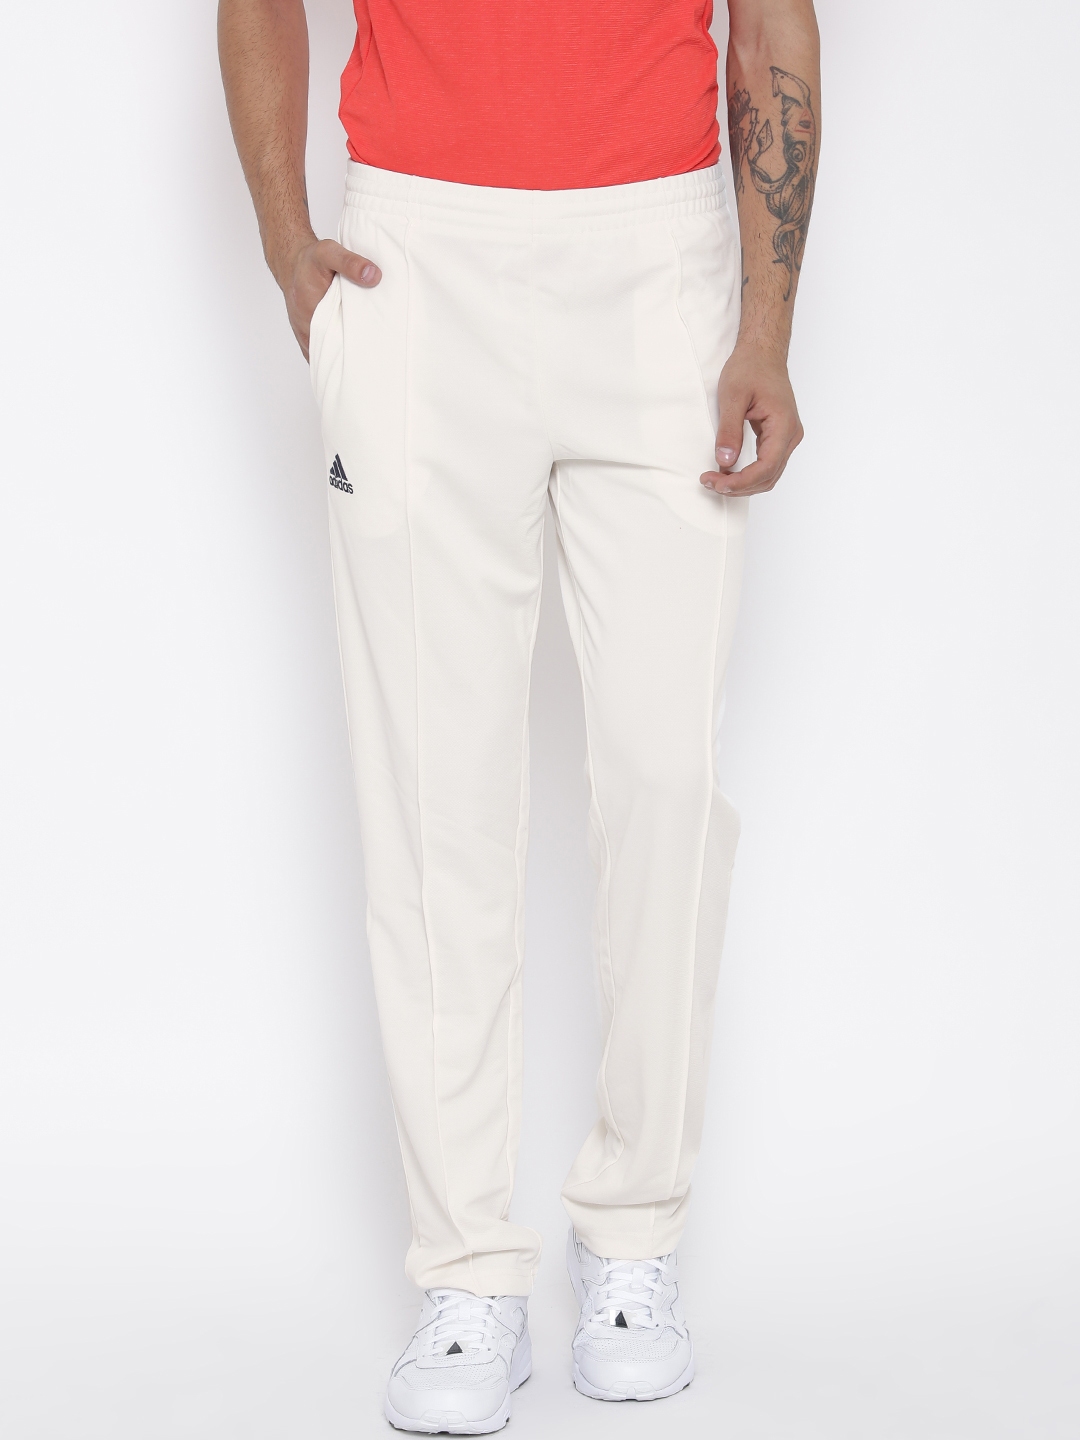 Buy Men White Atmos Cricket Track Pants From Fancode Shop